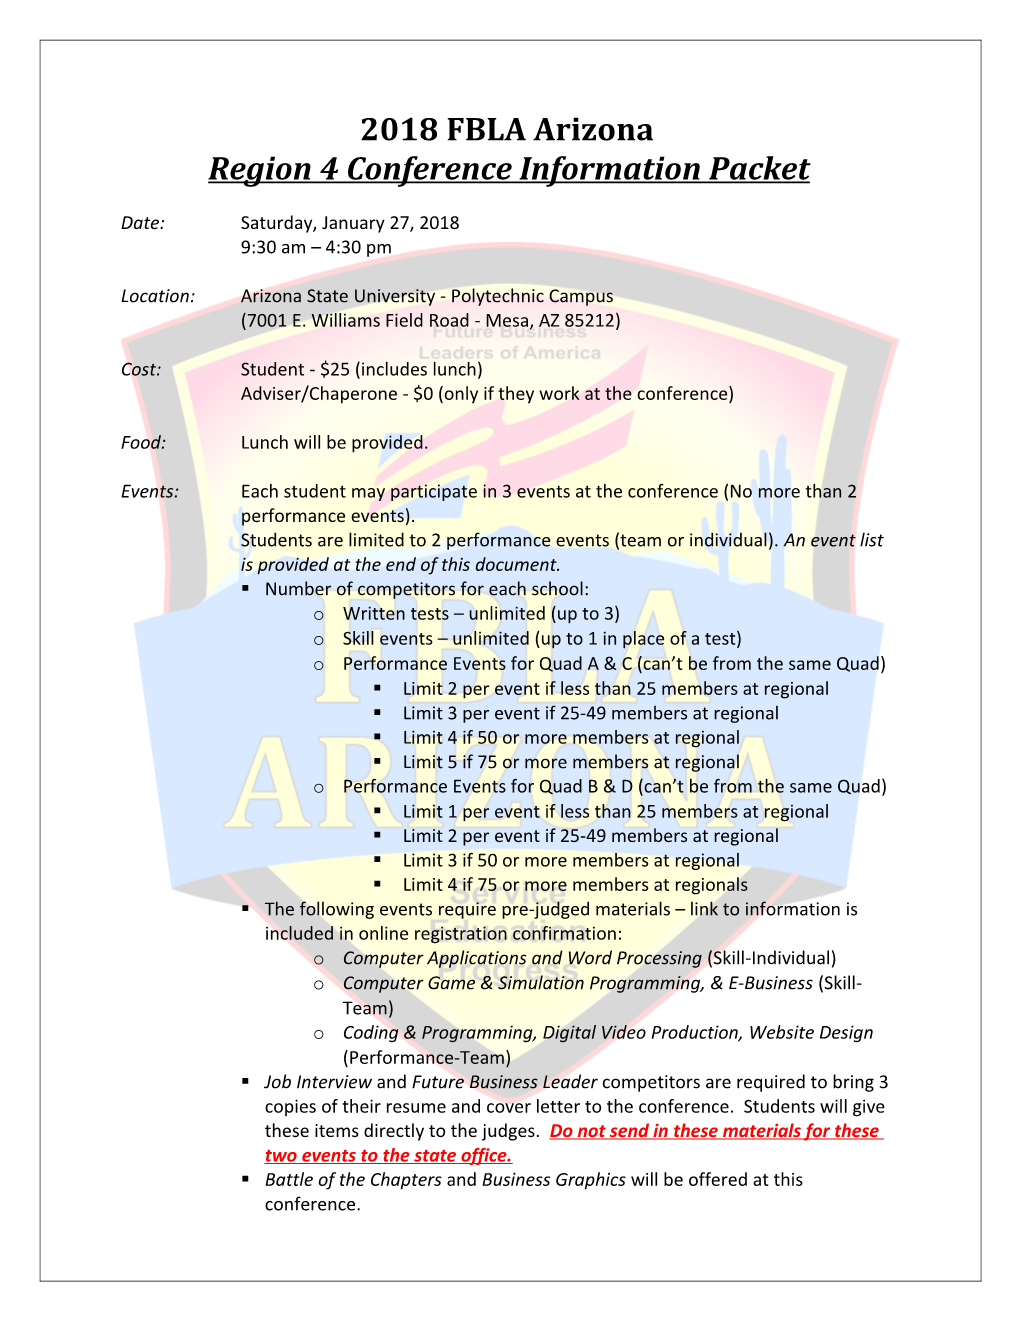 Region 4 Conference Information Packet